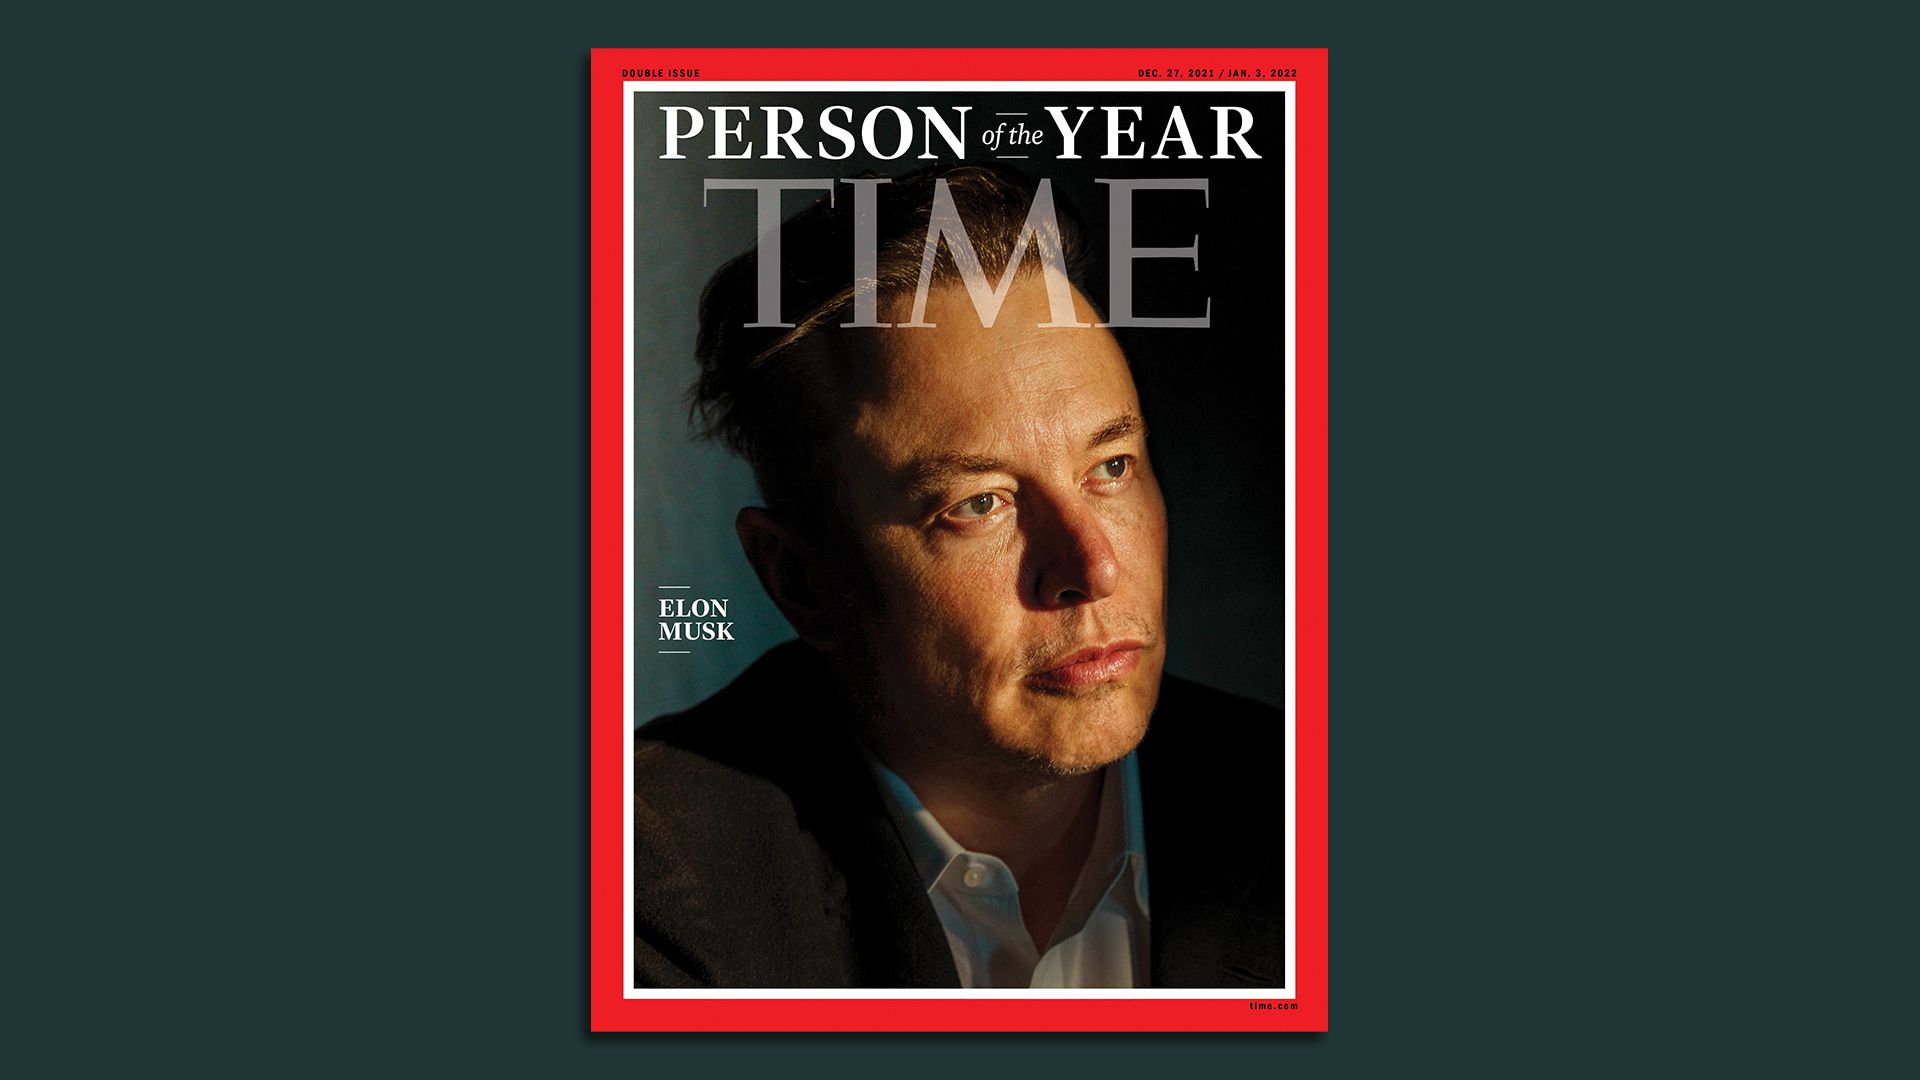 Image of Elon Musk on the cover of Time magazine as its 2021 Person of the Year